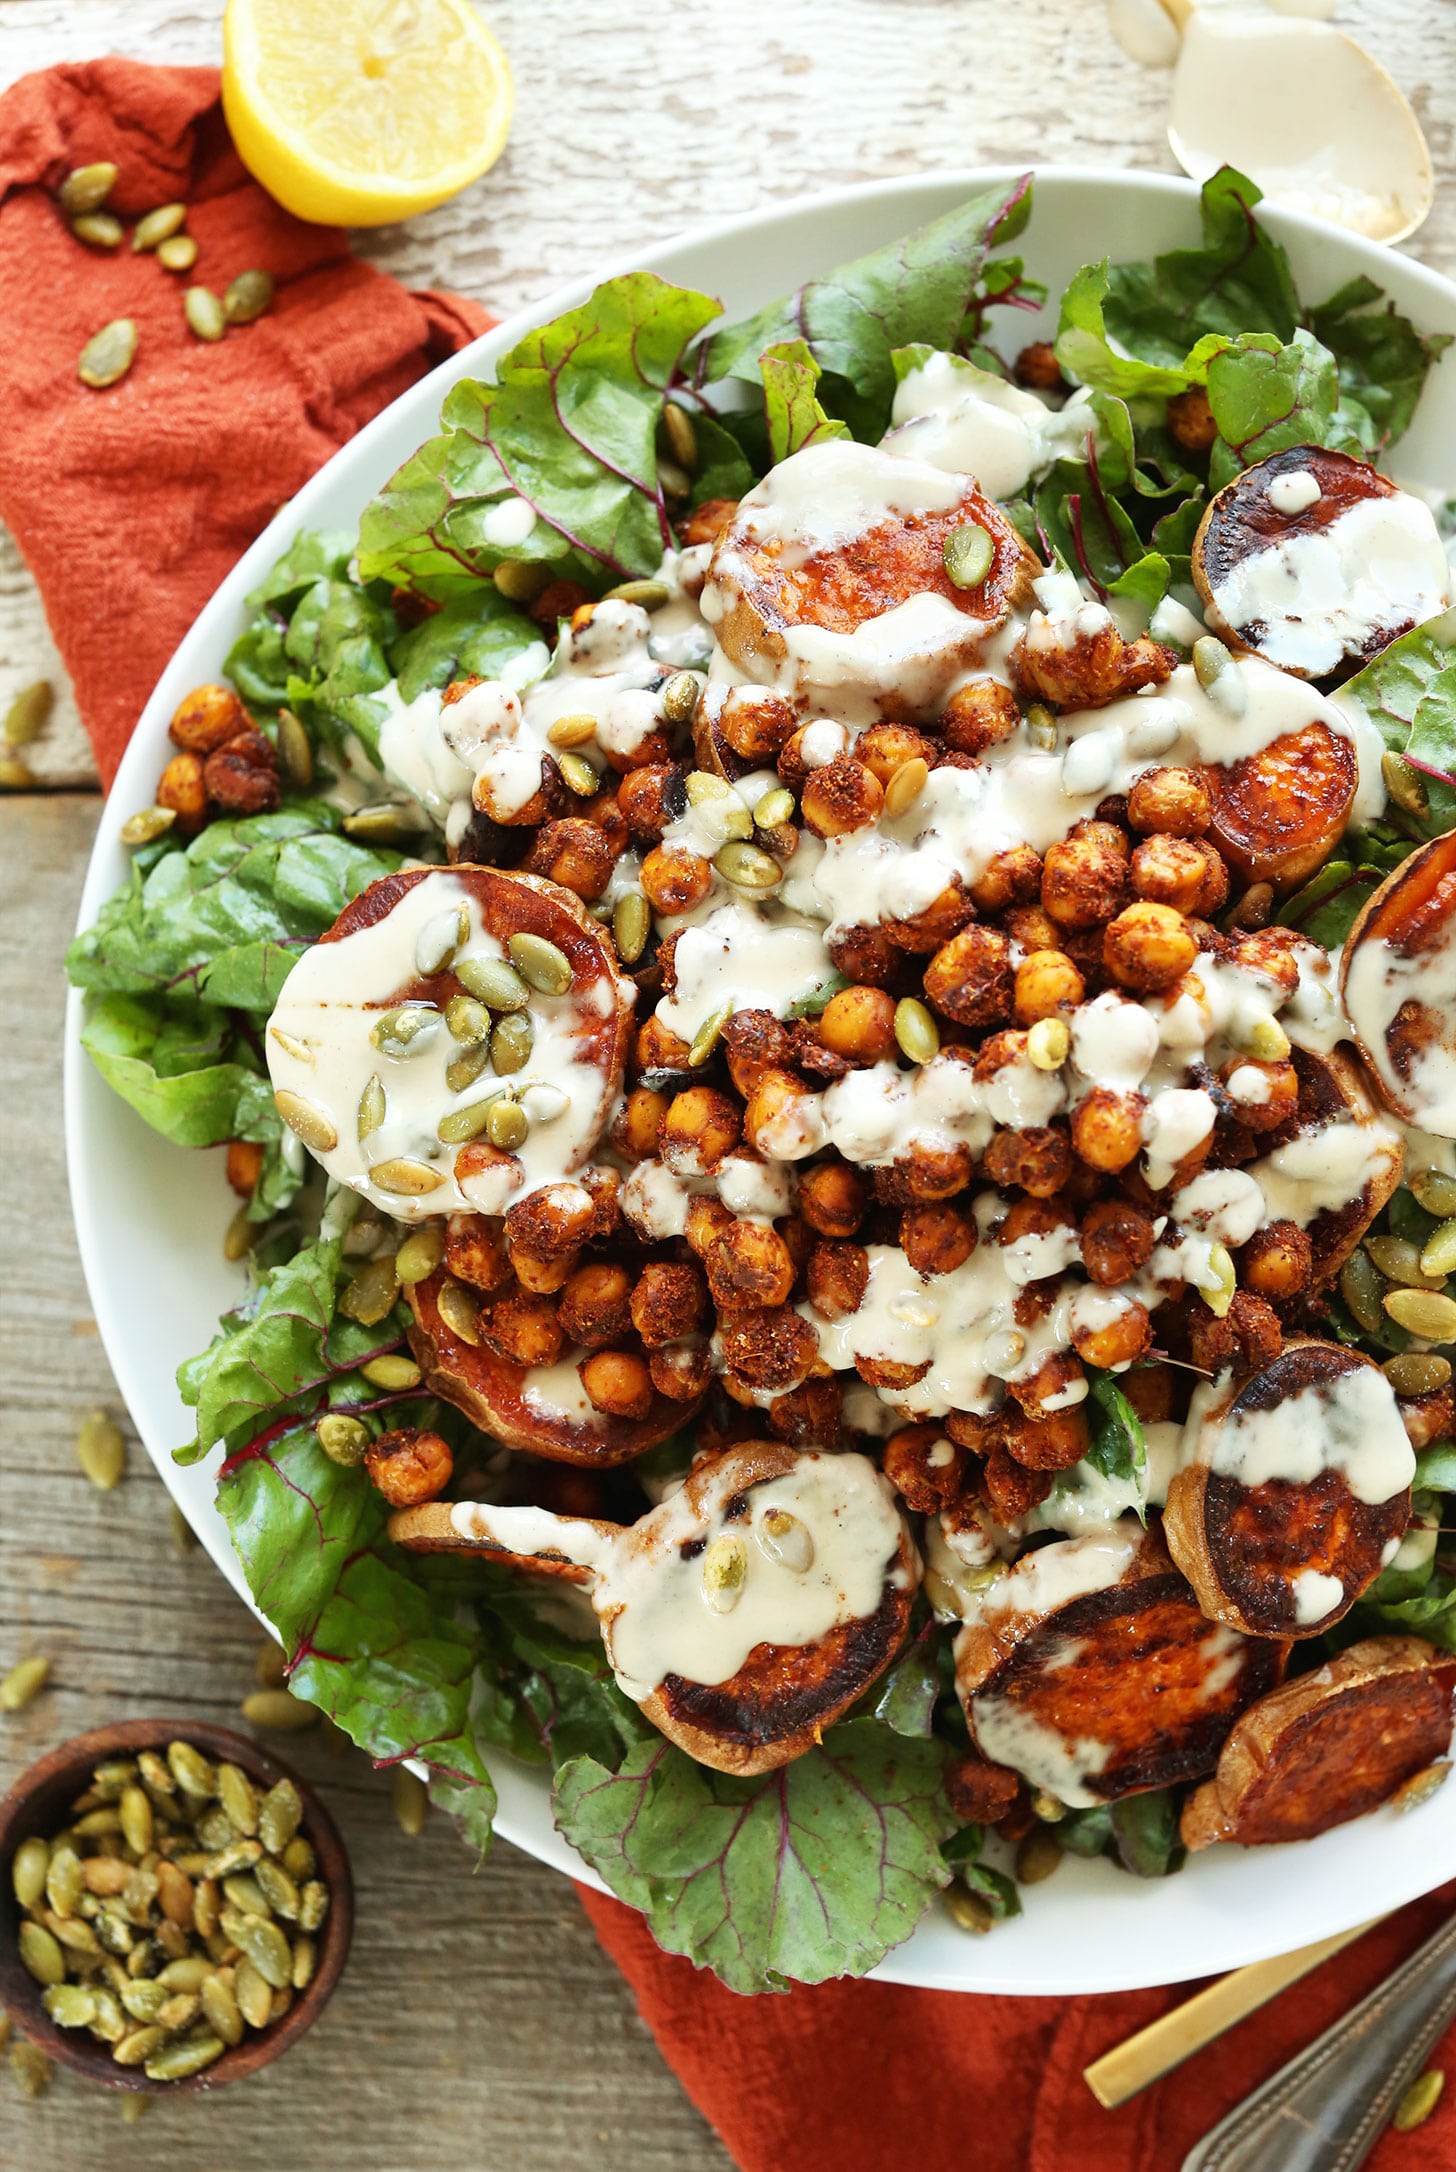 Roasted Sweet Potato and Chickpea Salad from minimalistbaker.com on foodiecrush.com